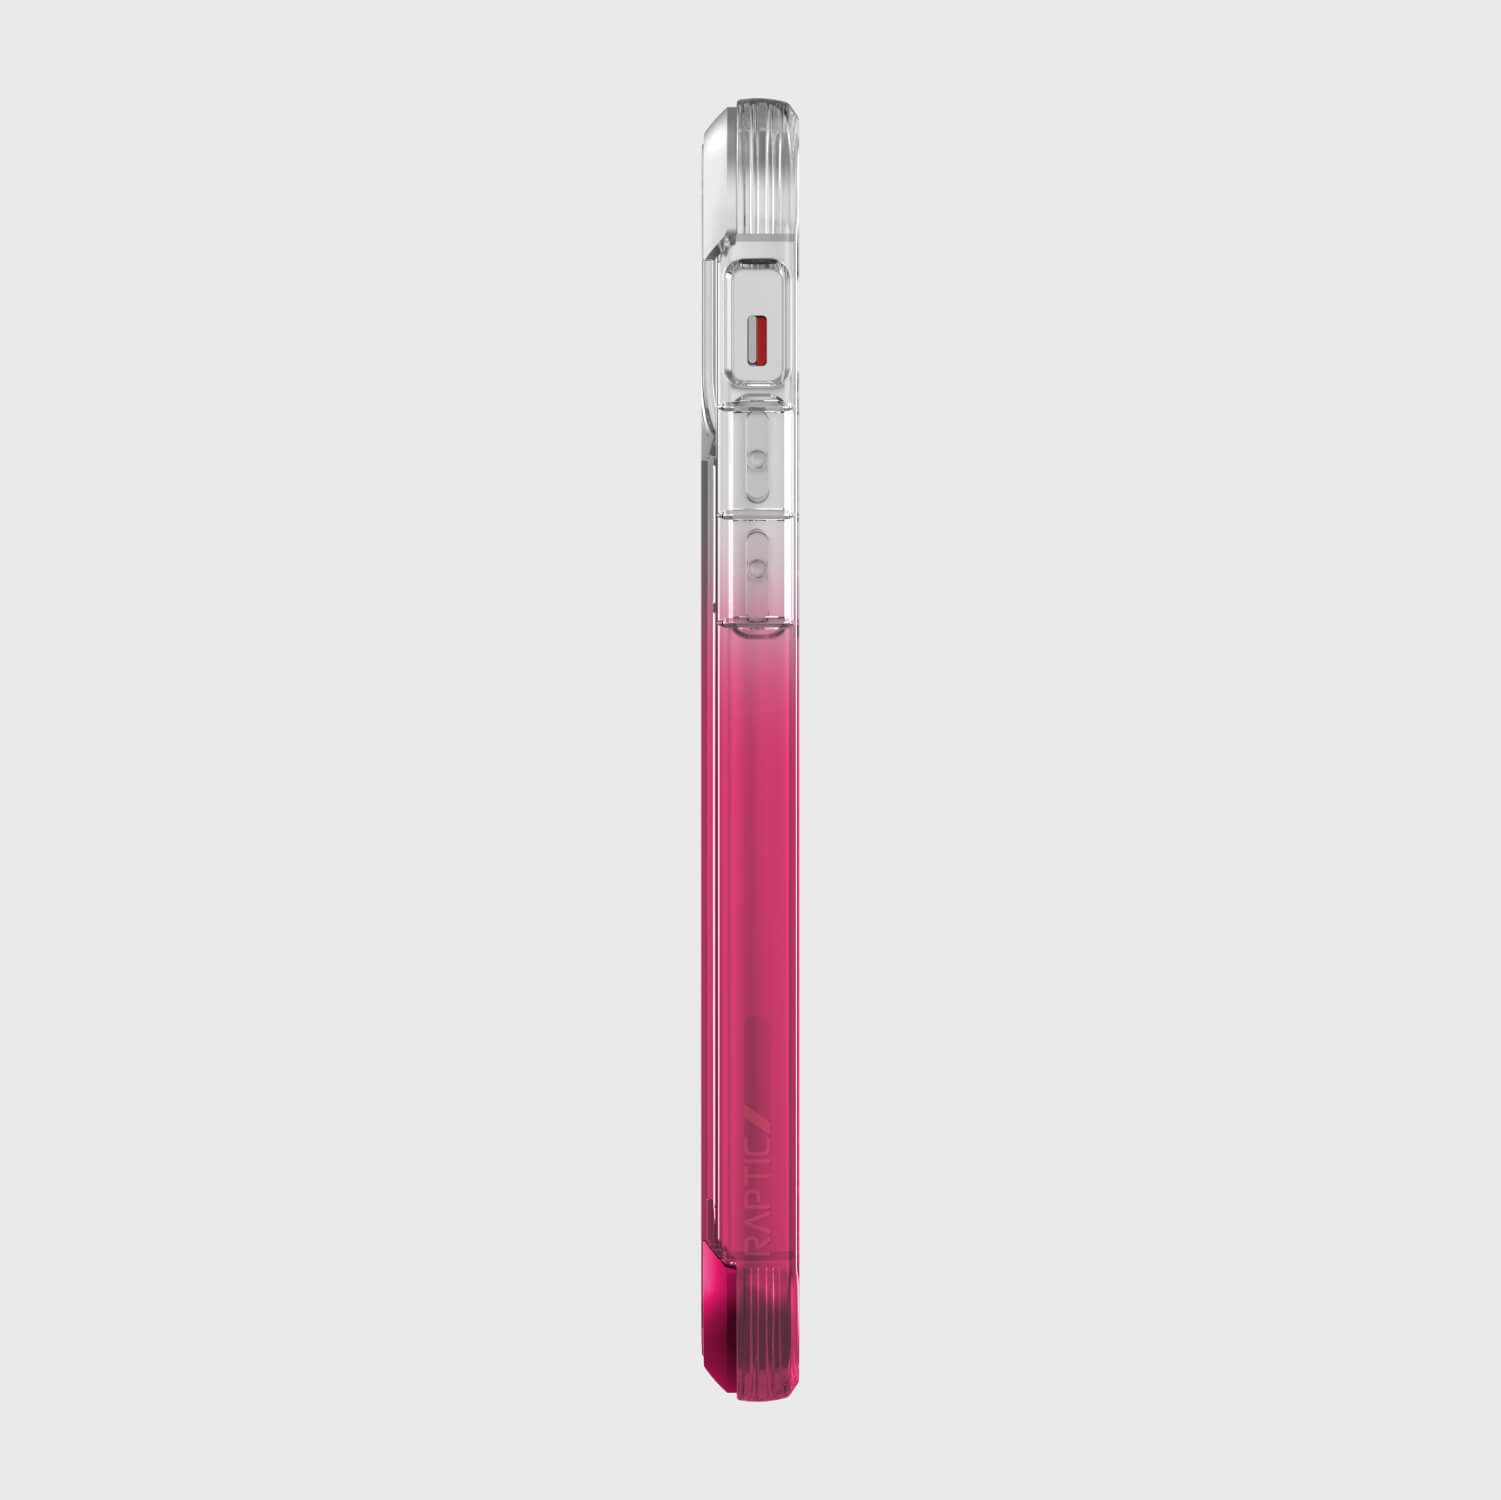 A Raptic iPhone 12 Pro Max Case - AIR, a pink liquid bottle with 4-metre drop protection and Wireless Charging Compatibility, showcased against a white background.